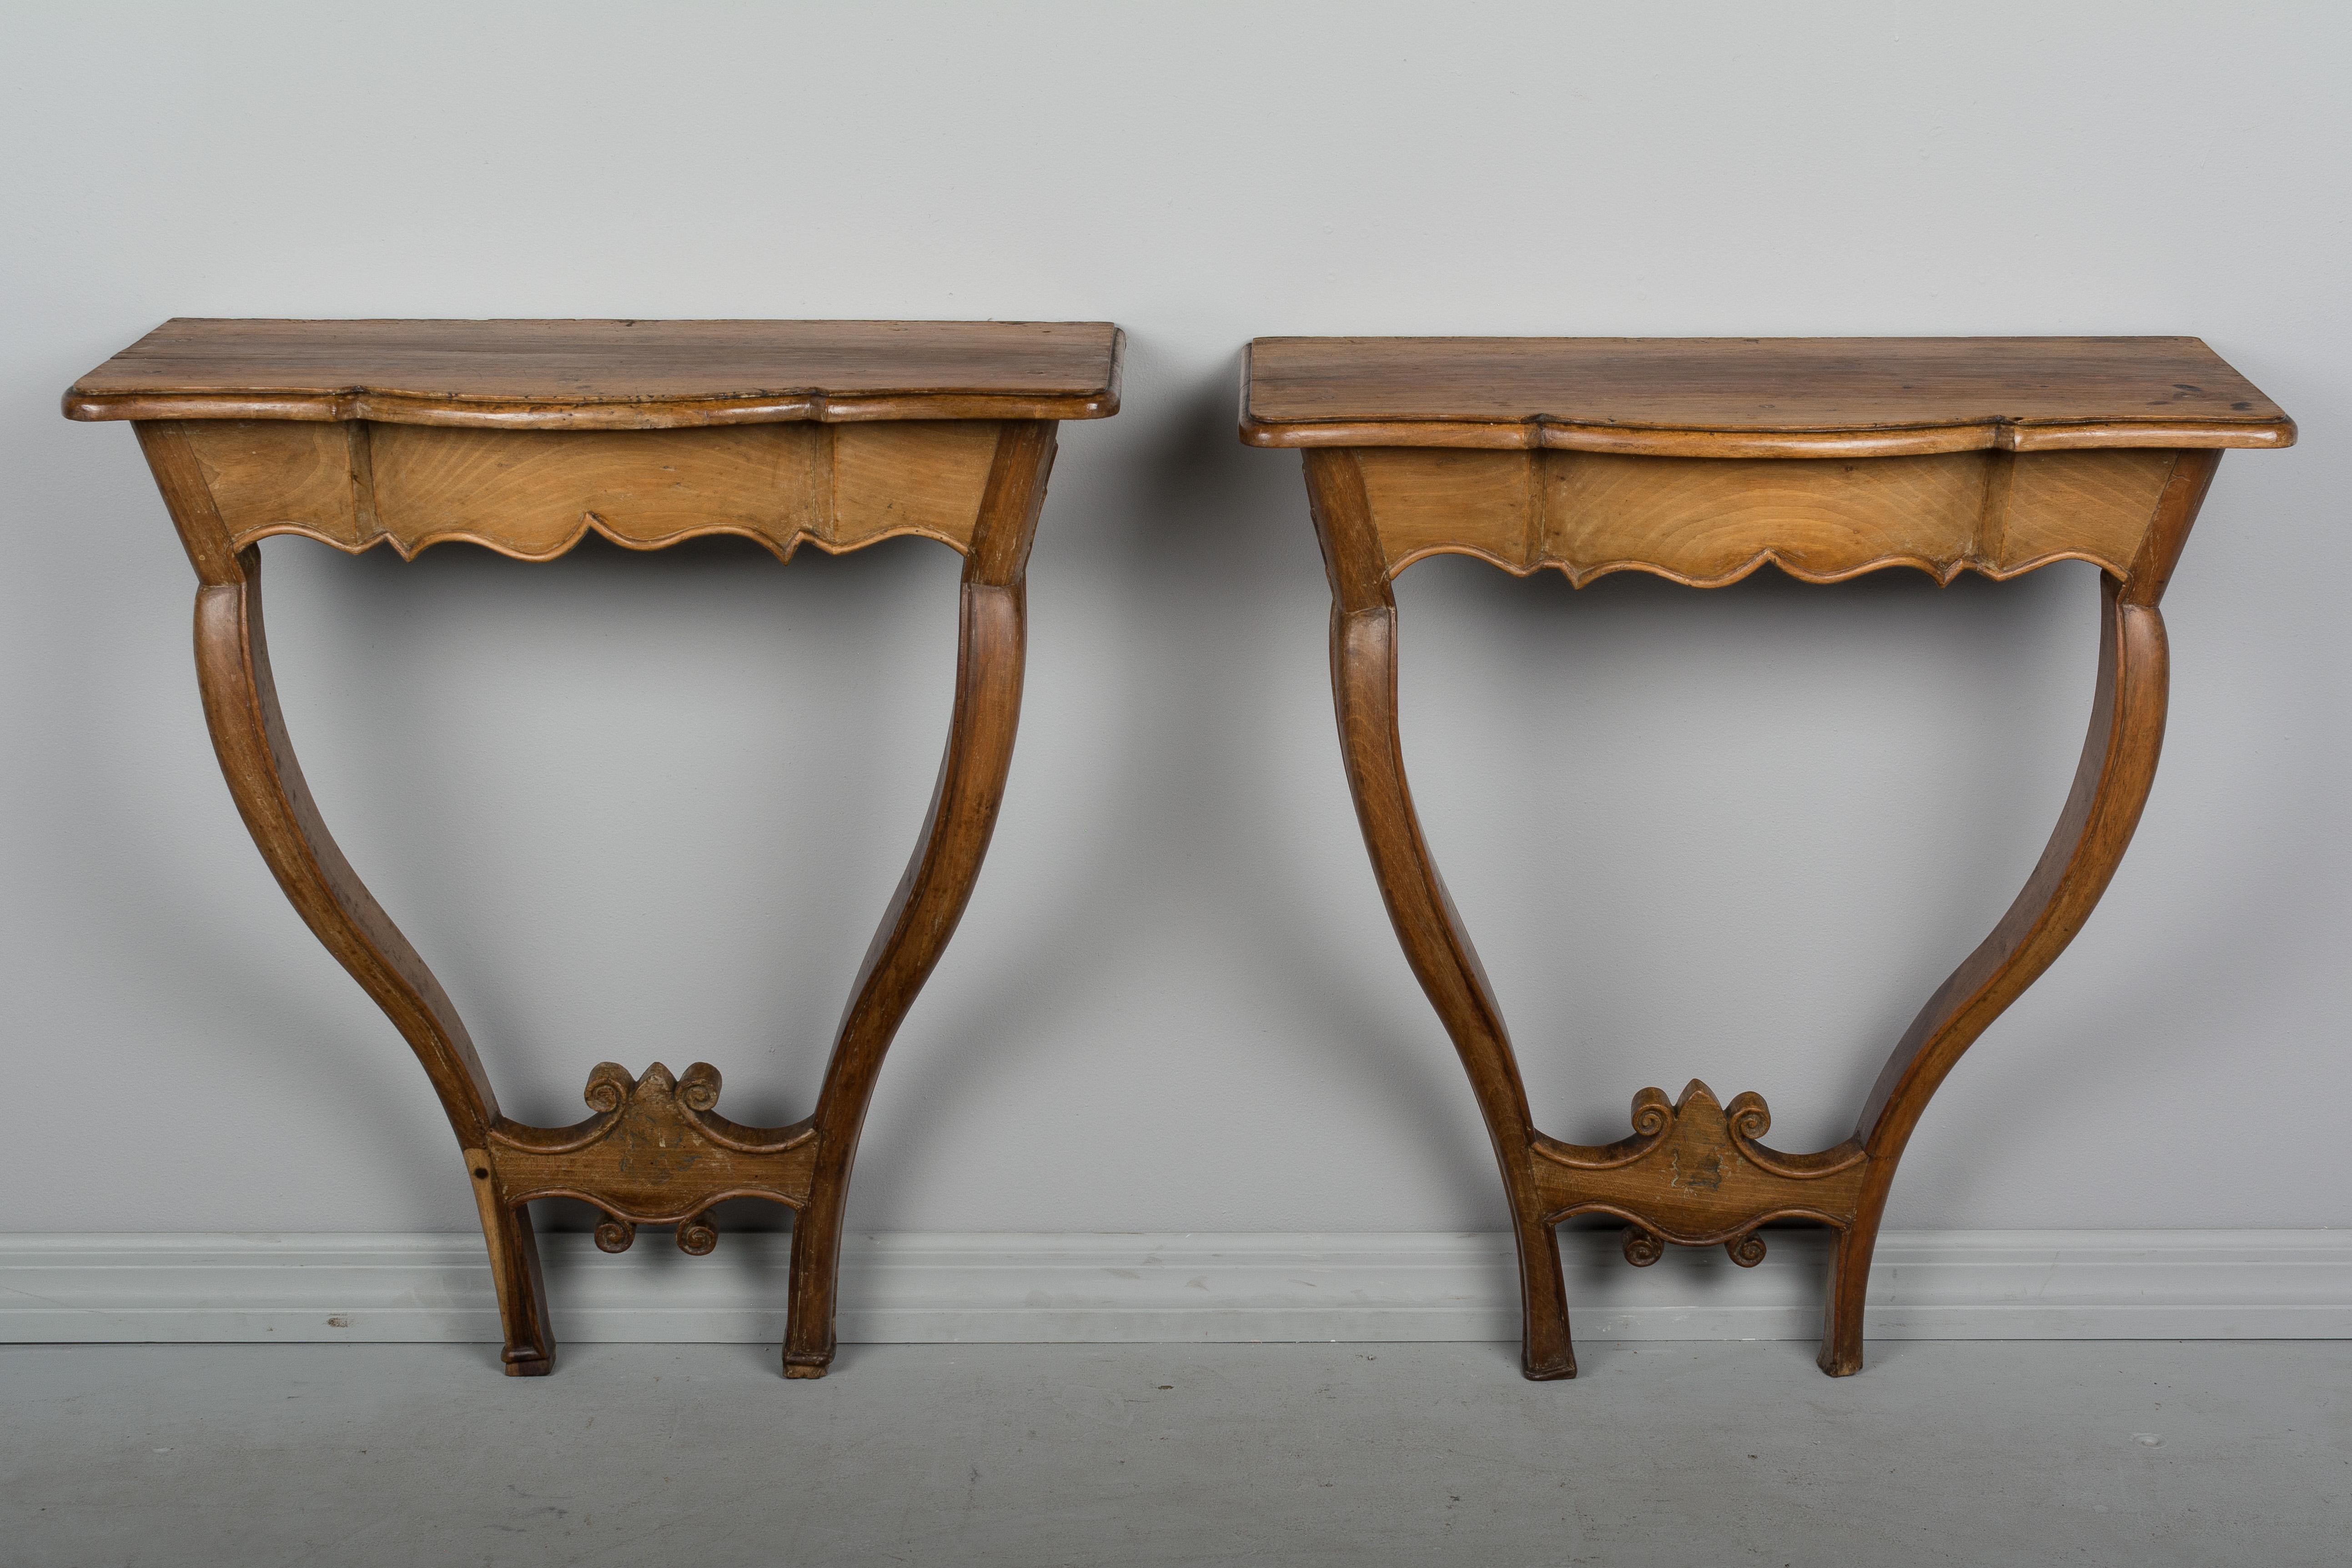 A pair of 18th century French Louis XV style console tables made of solid walnut with nice patina and waxed finish. Simple in design, with elegant curved legs and scalloped apron. These consoles once had a painted finish and have signs of a missing